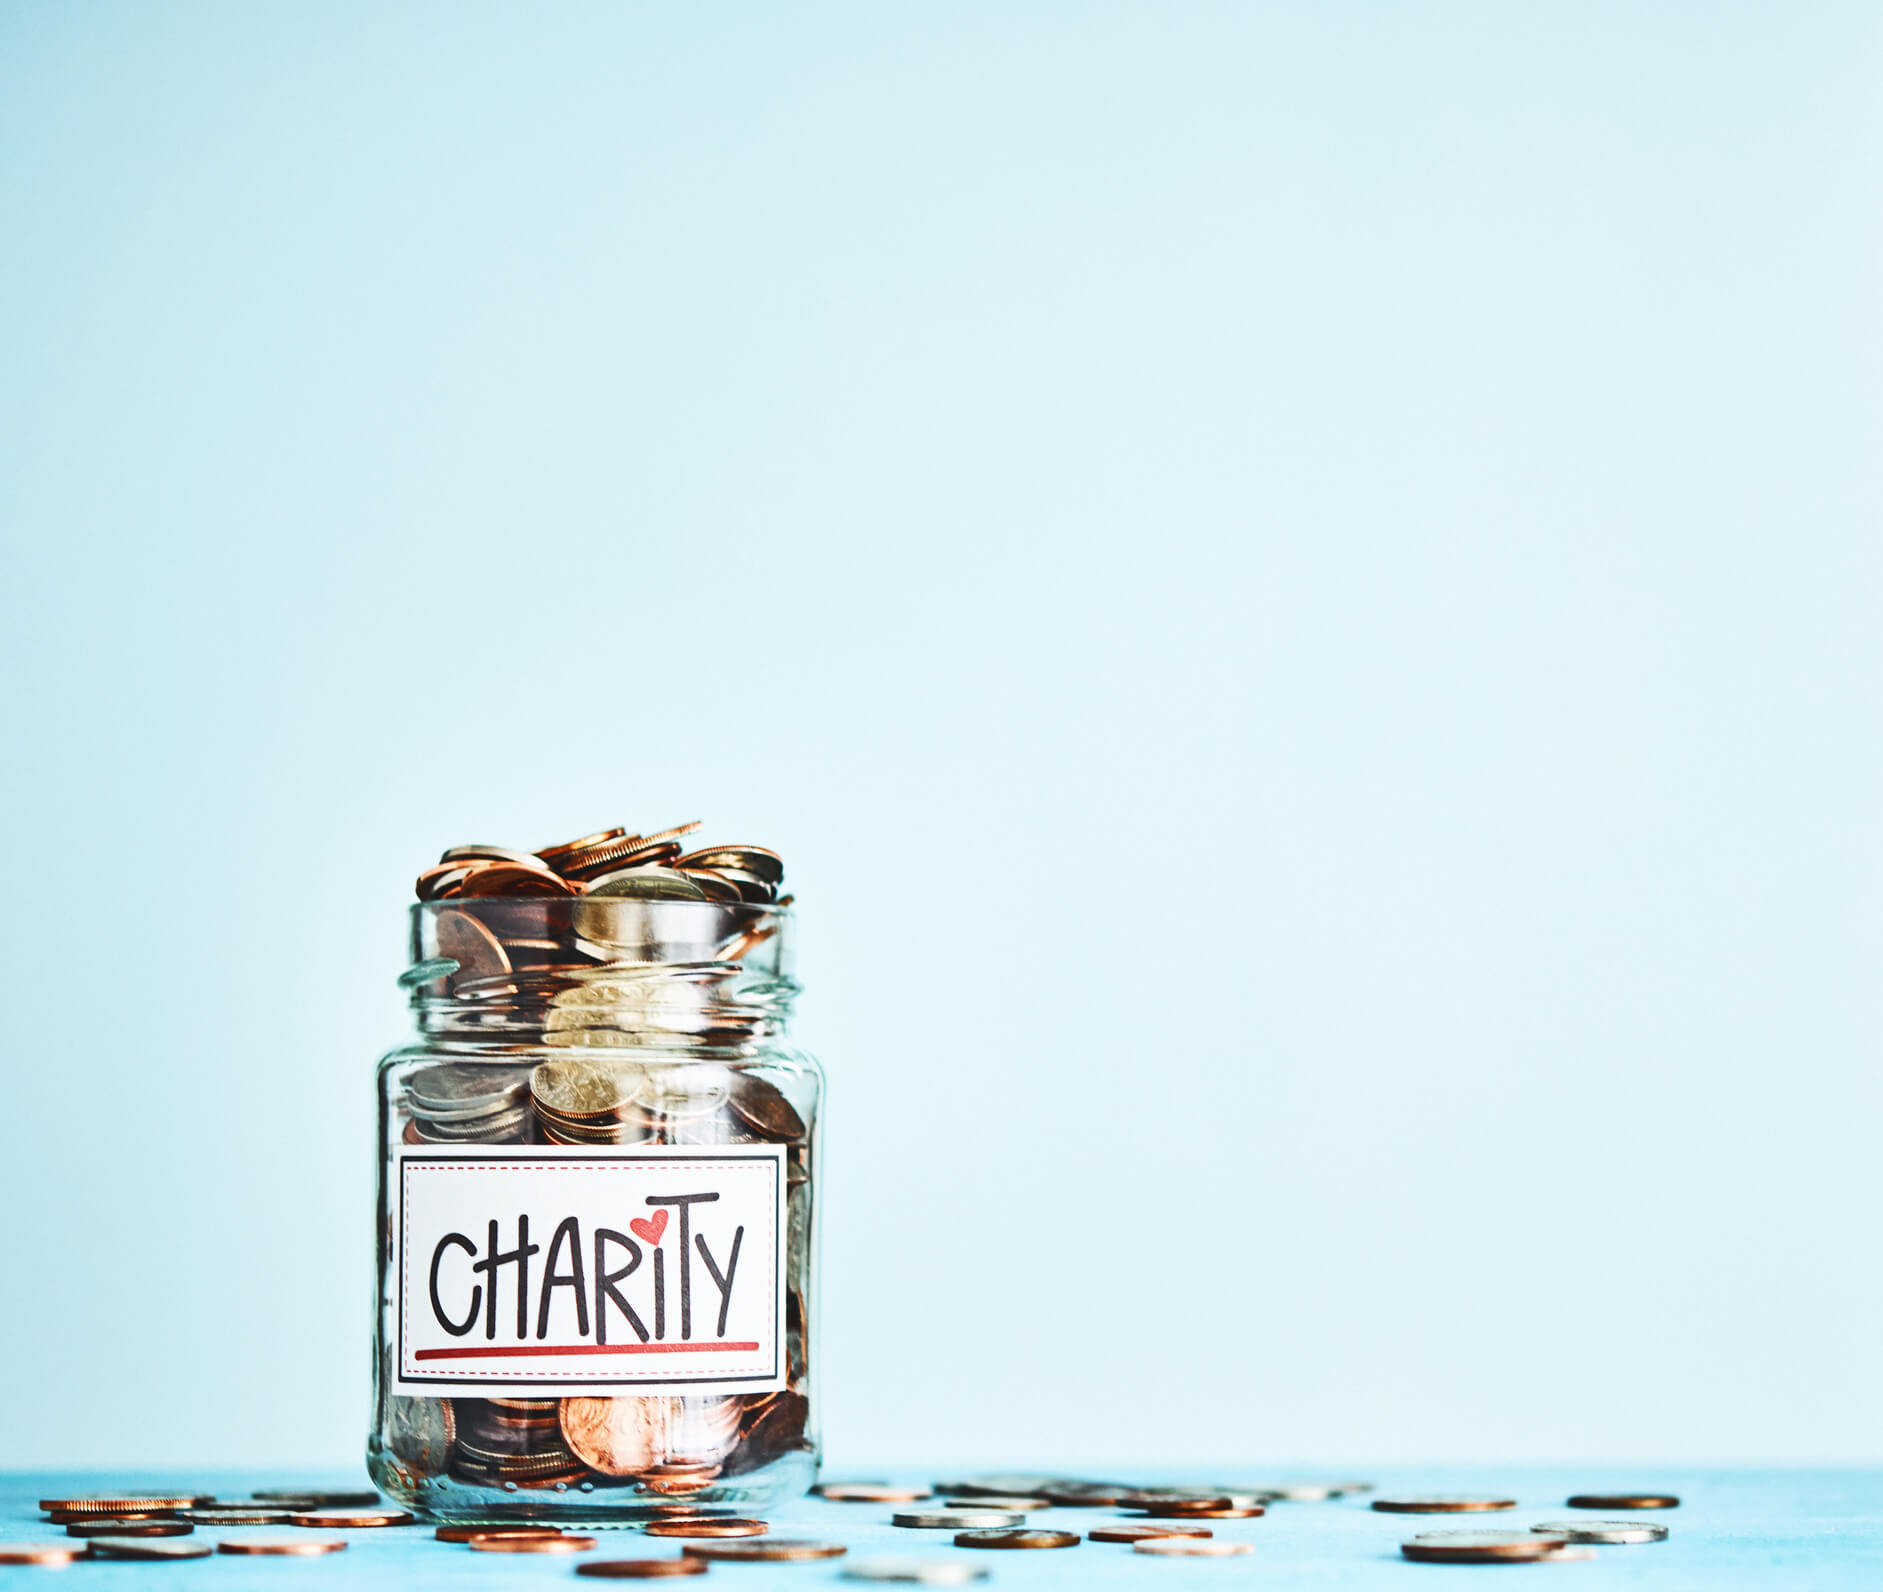 Jar of coins over blue background - representing charitable giving.